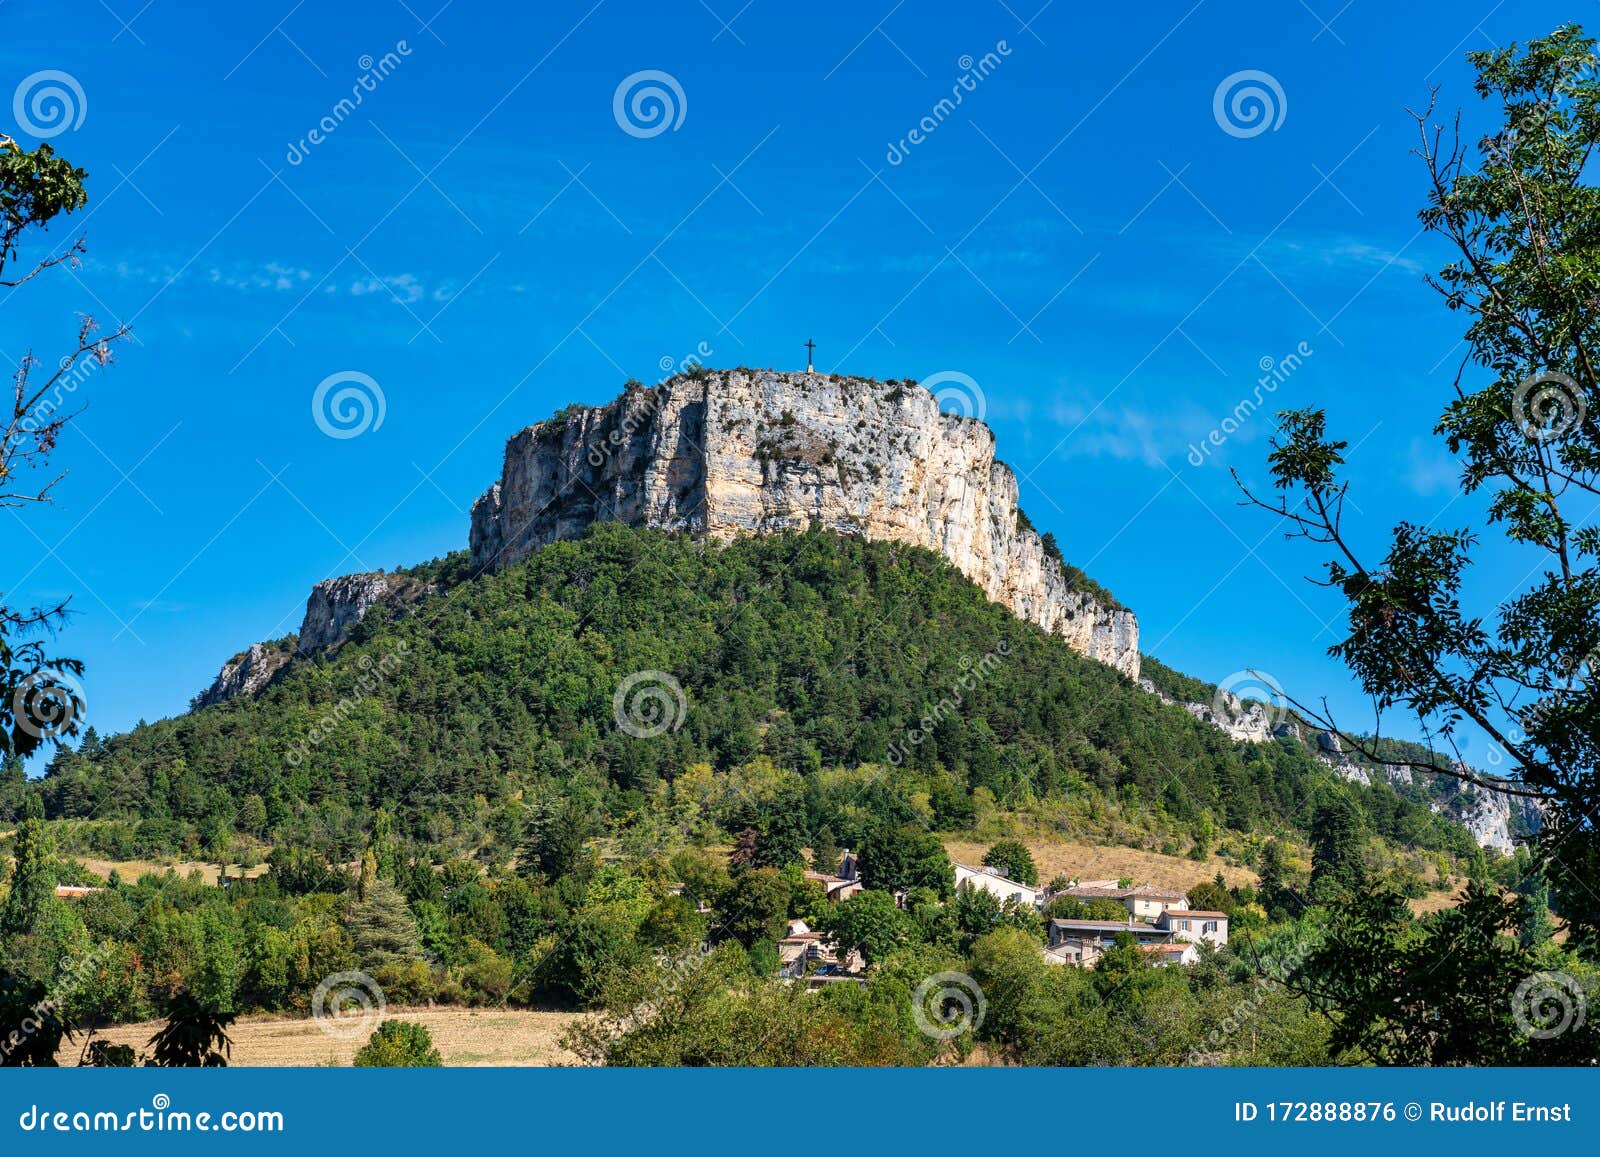 plain de baix with vellan rock in vercors, french alps, france